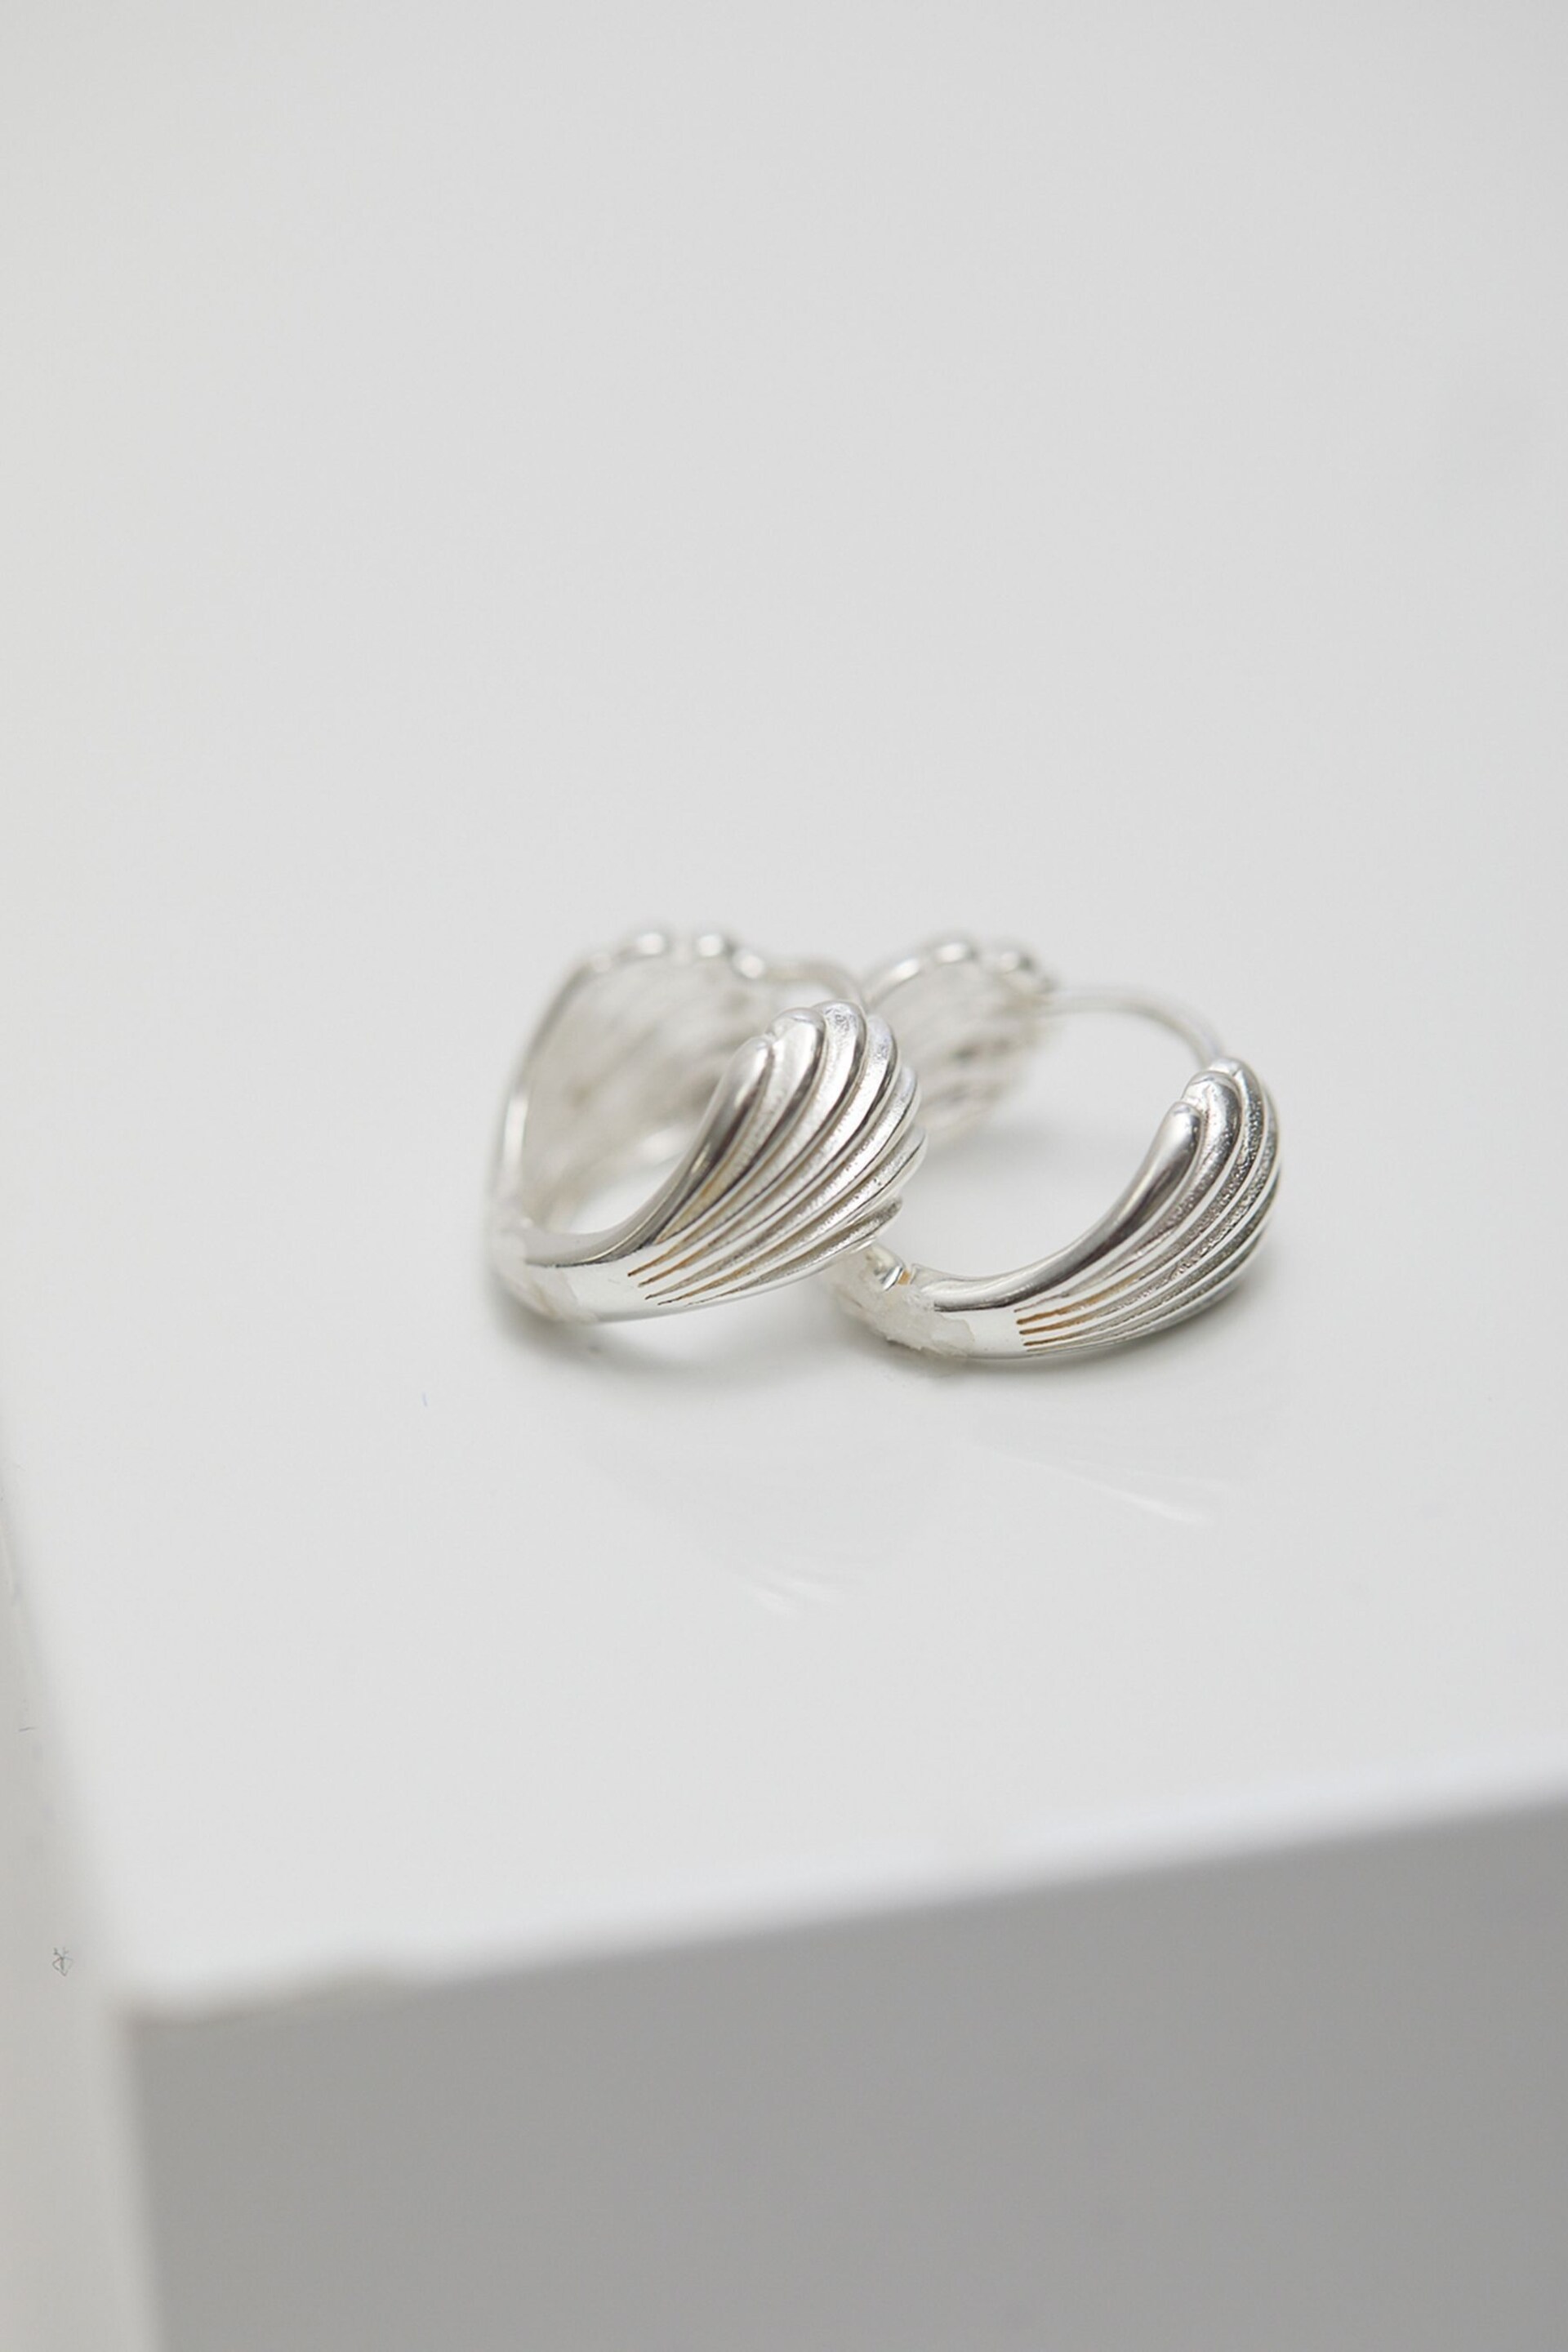 Simply Silver Sterling Silver Tone 925 Shell Hoop Earrings - Image 2 of 3